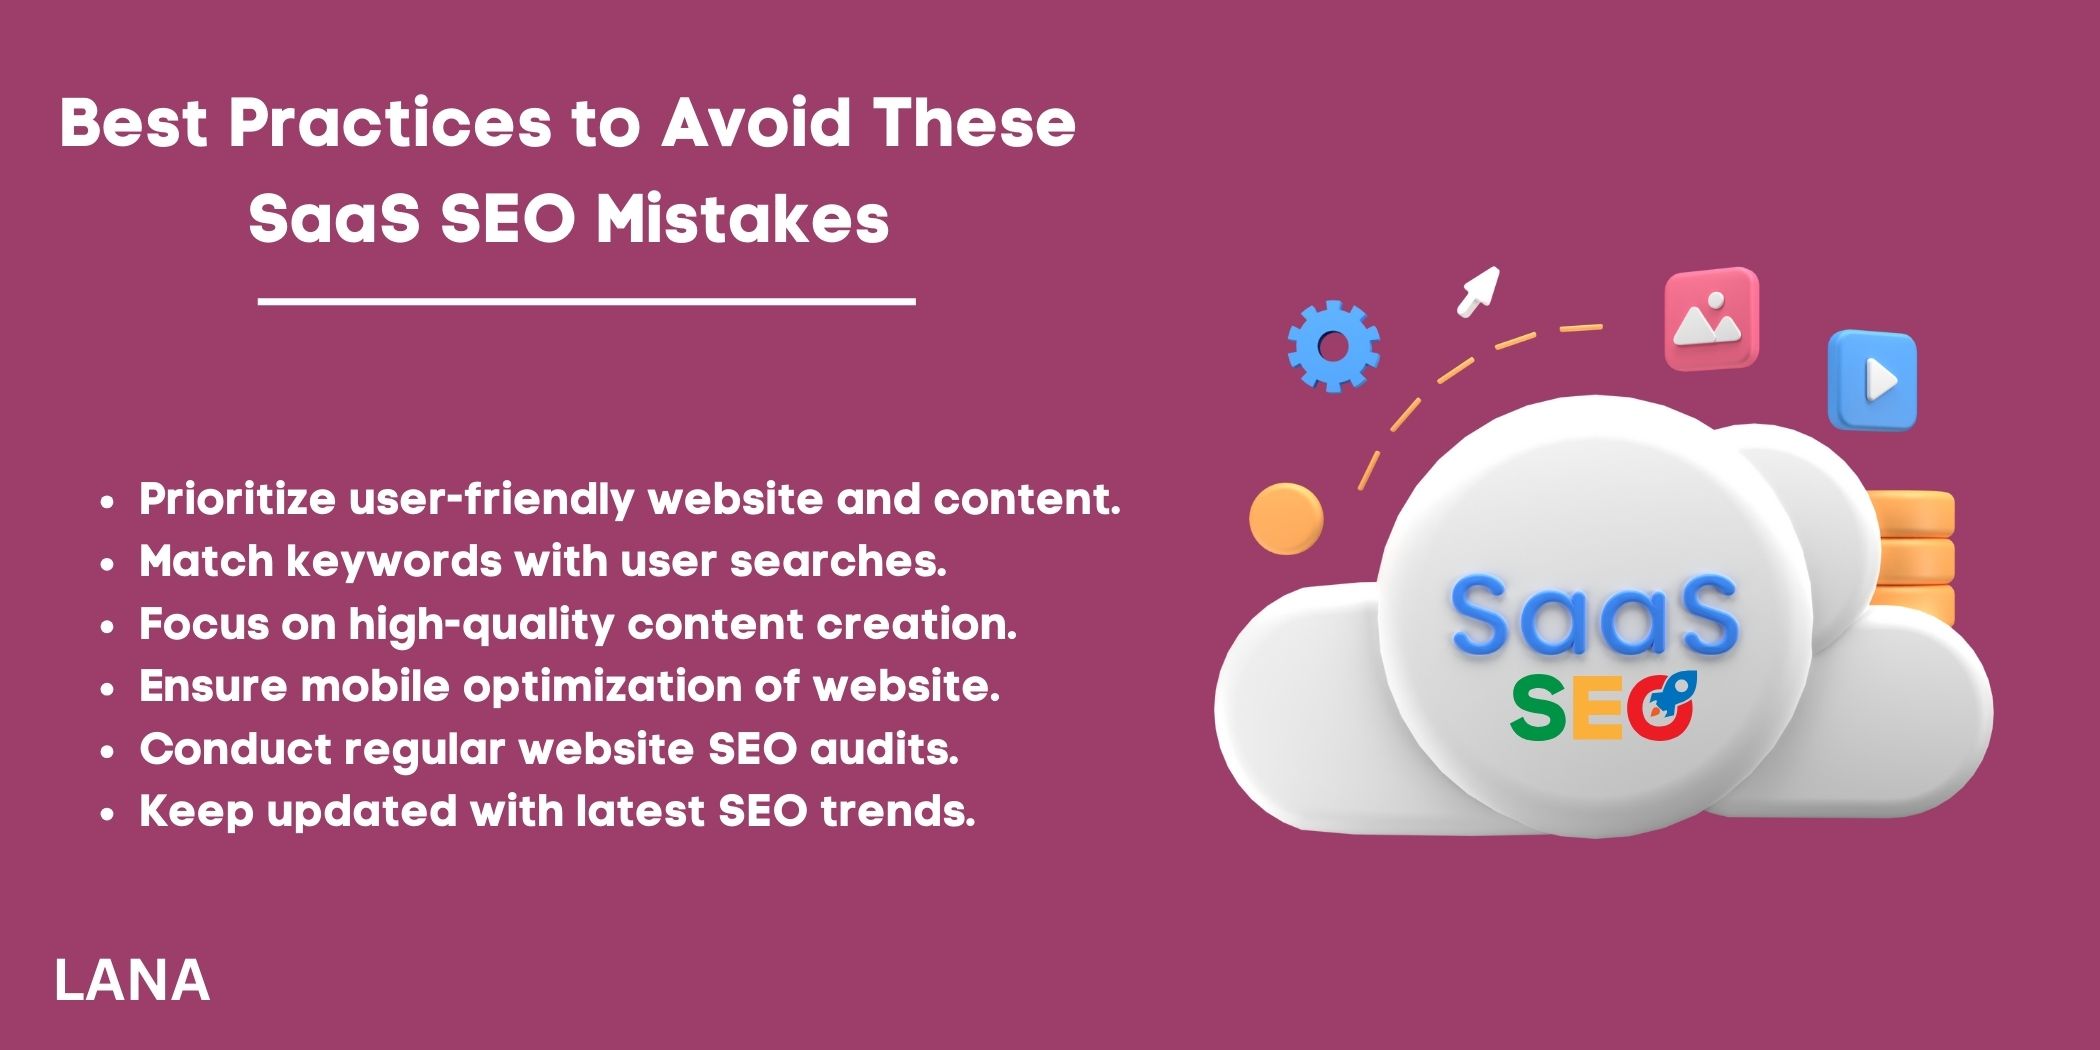 Best Practices to Avoid These SaaS SEO Mistakes